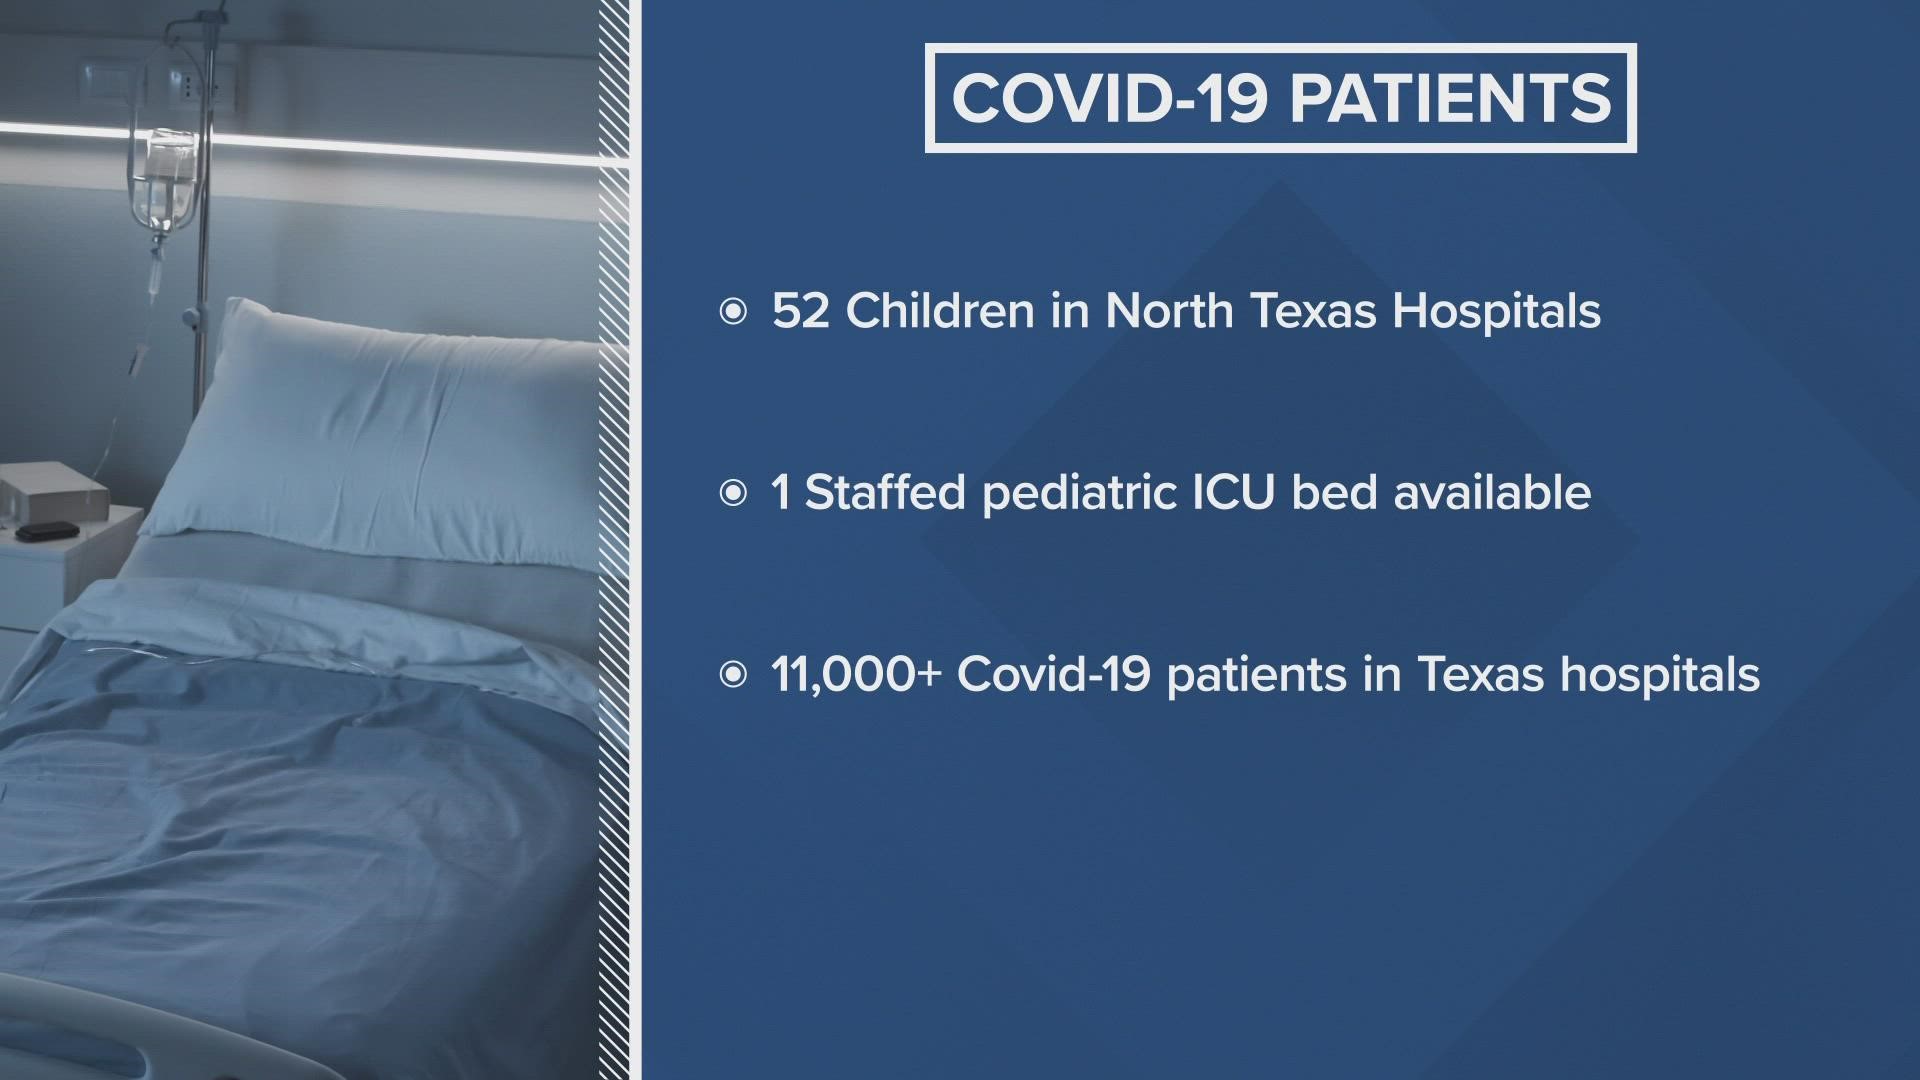 Daily COVID-19 cases at long-term care facilities in Texas are also on the rise.